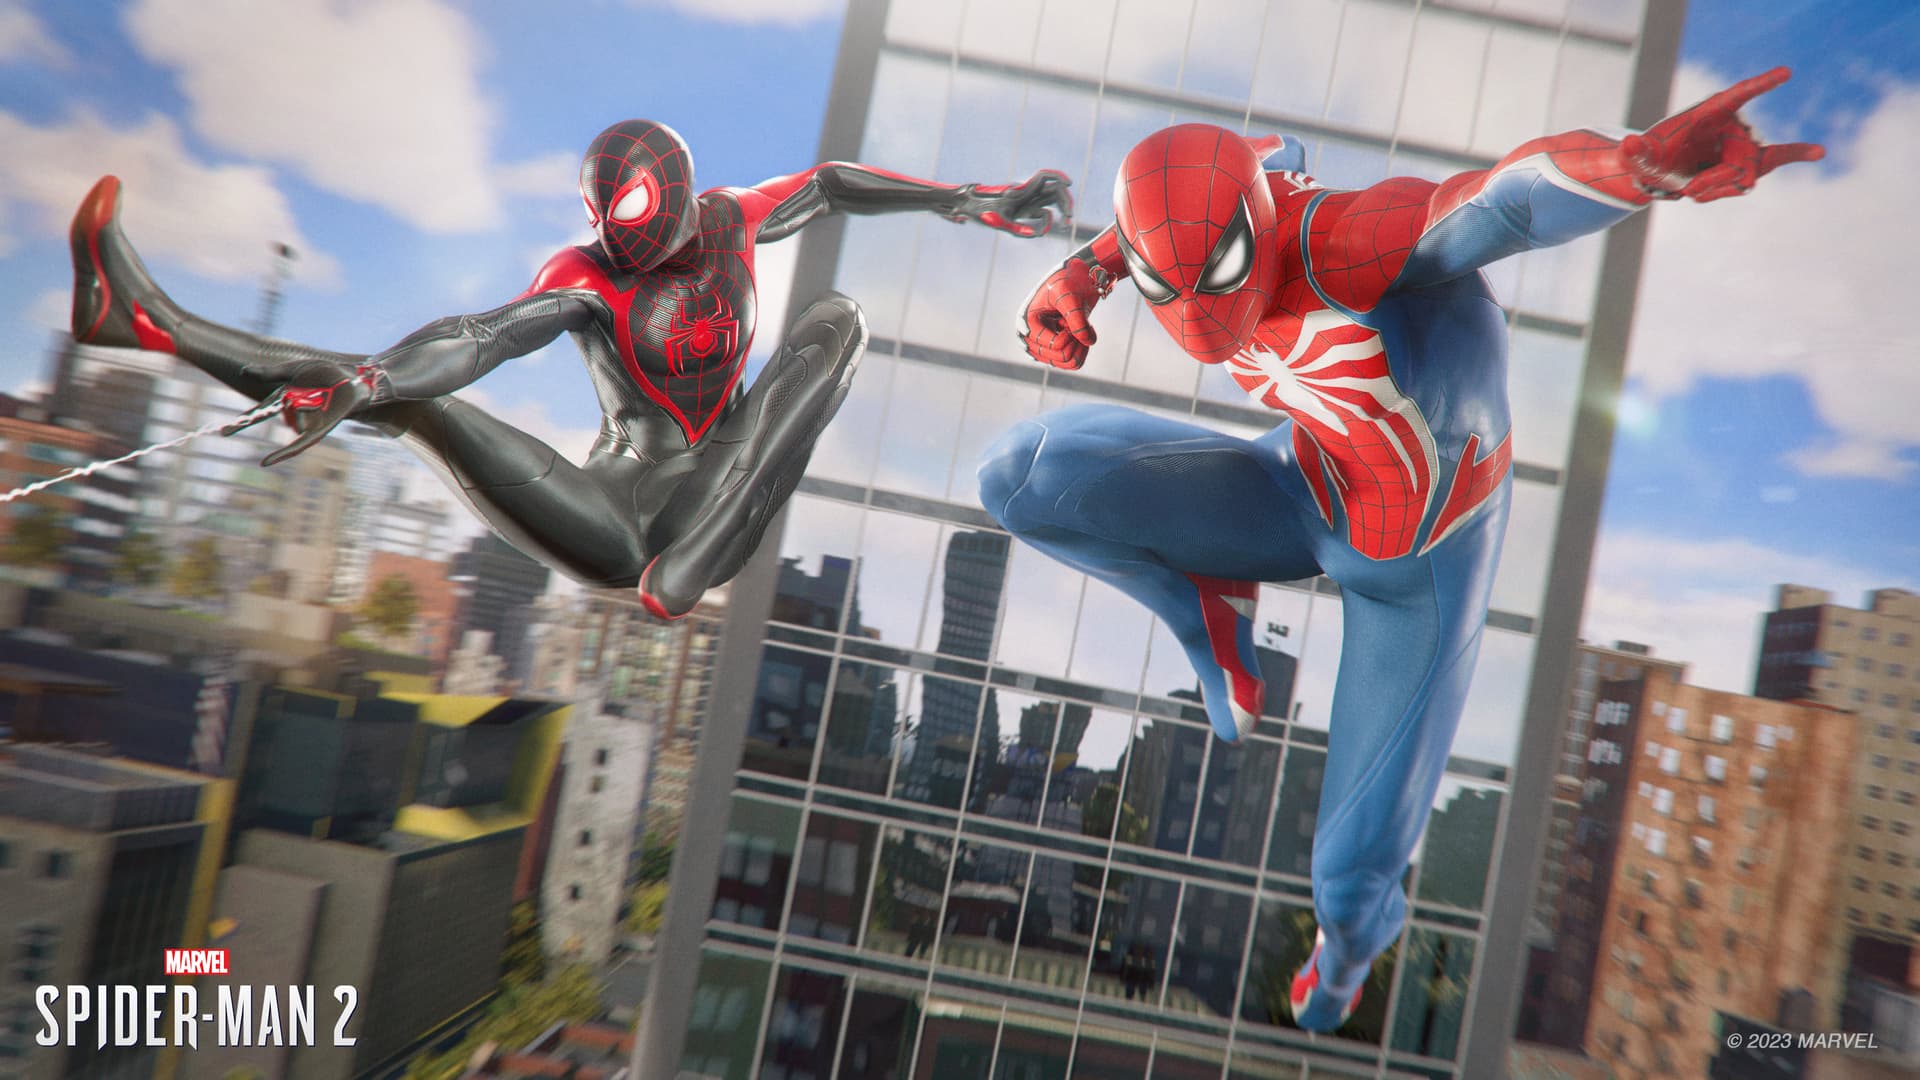 Peter Parker and Miles Morales swing through Marvel's New York in 'Marvel's Spider-Man 2'